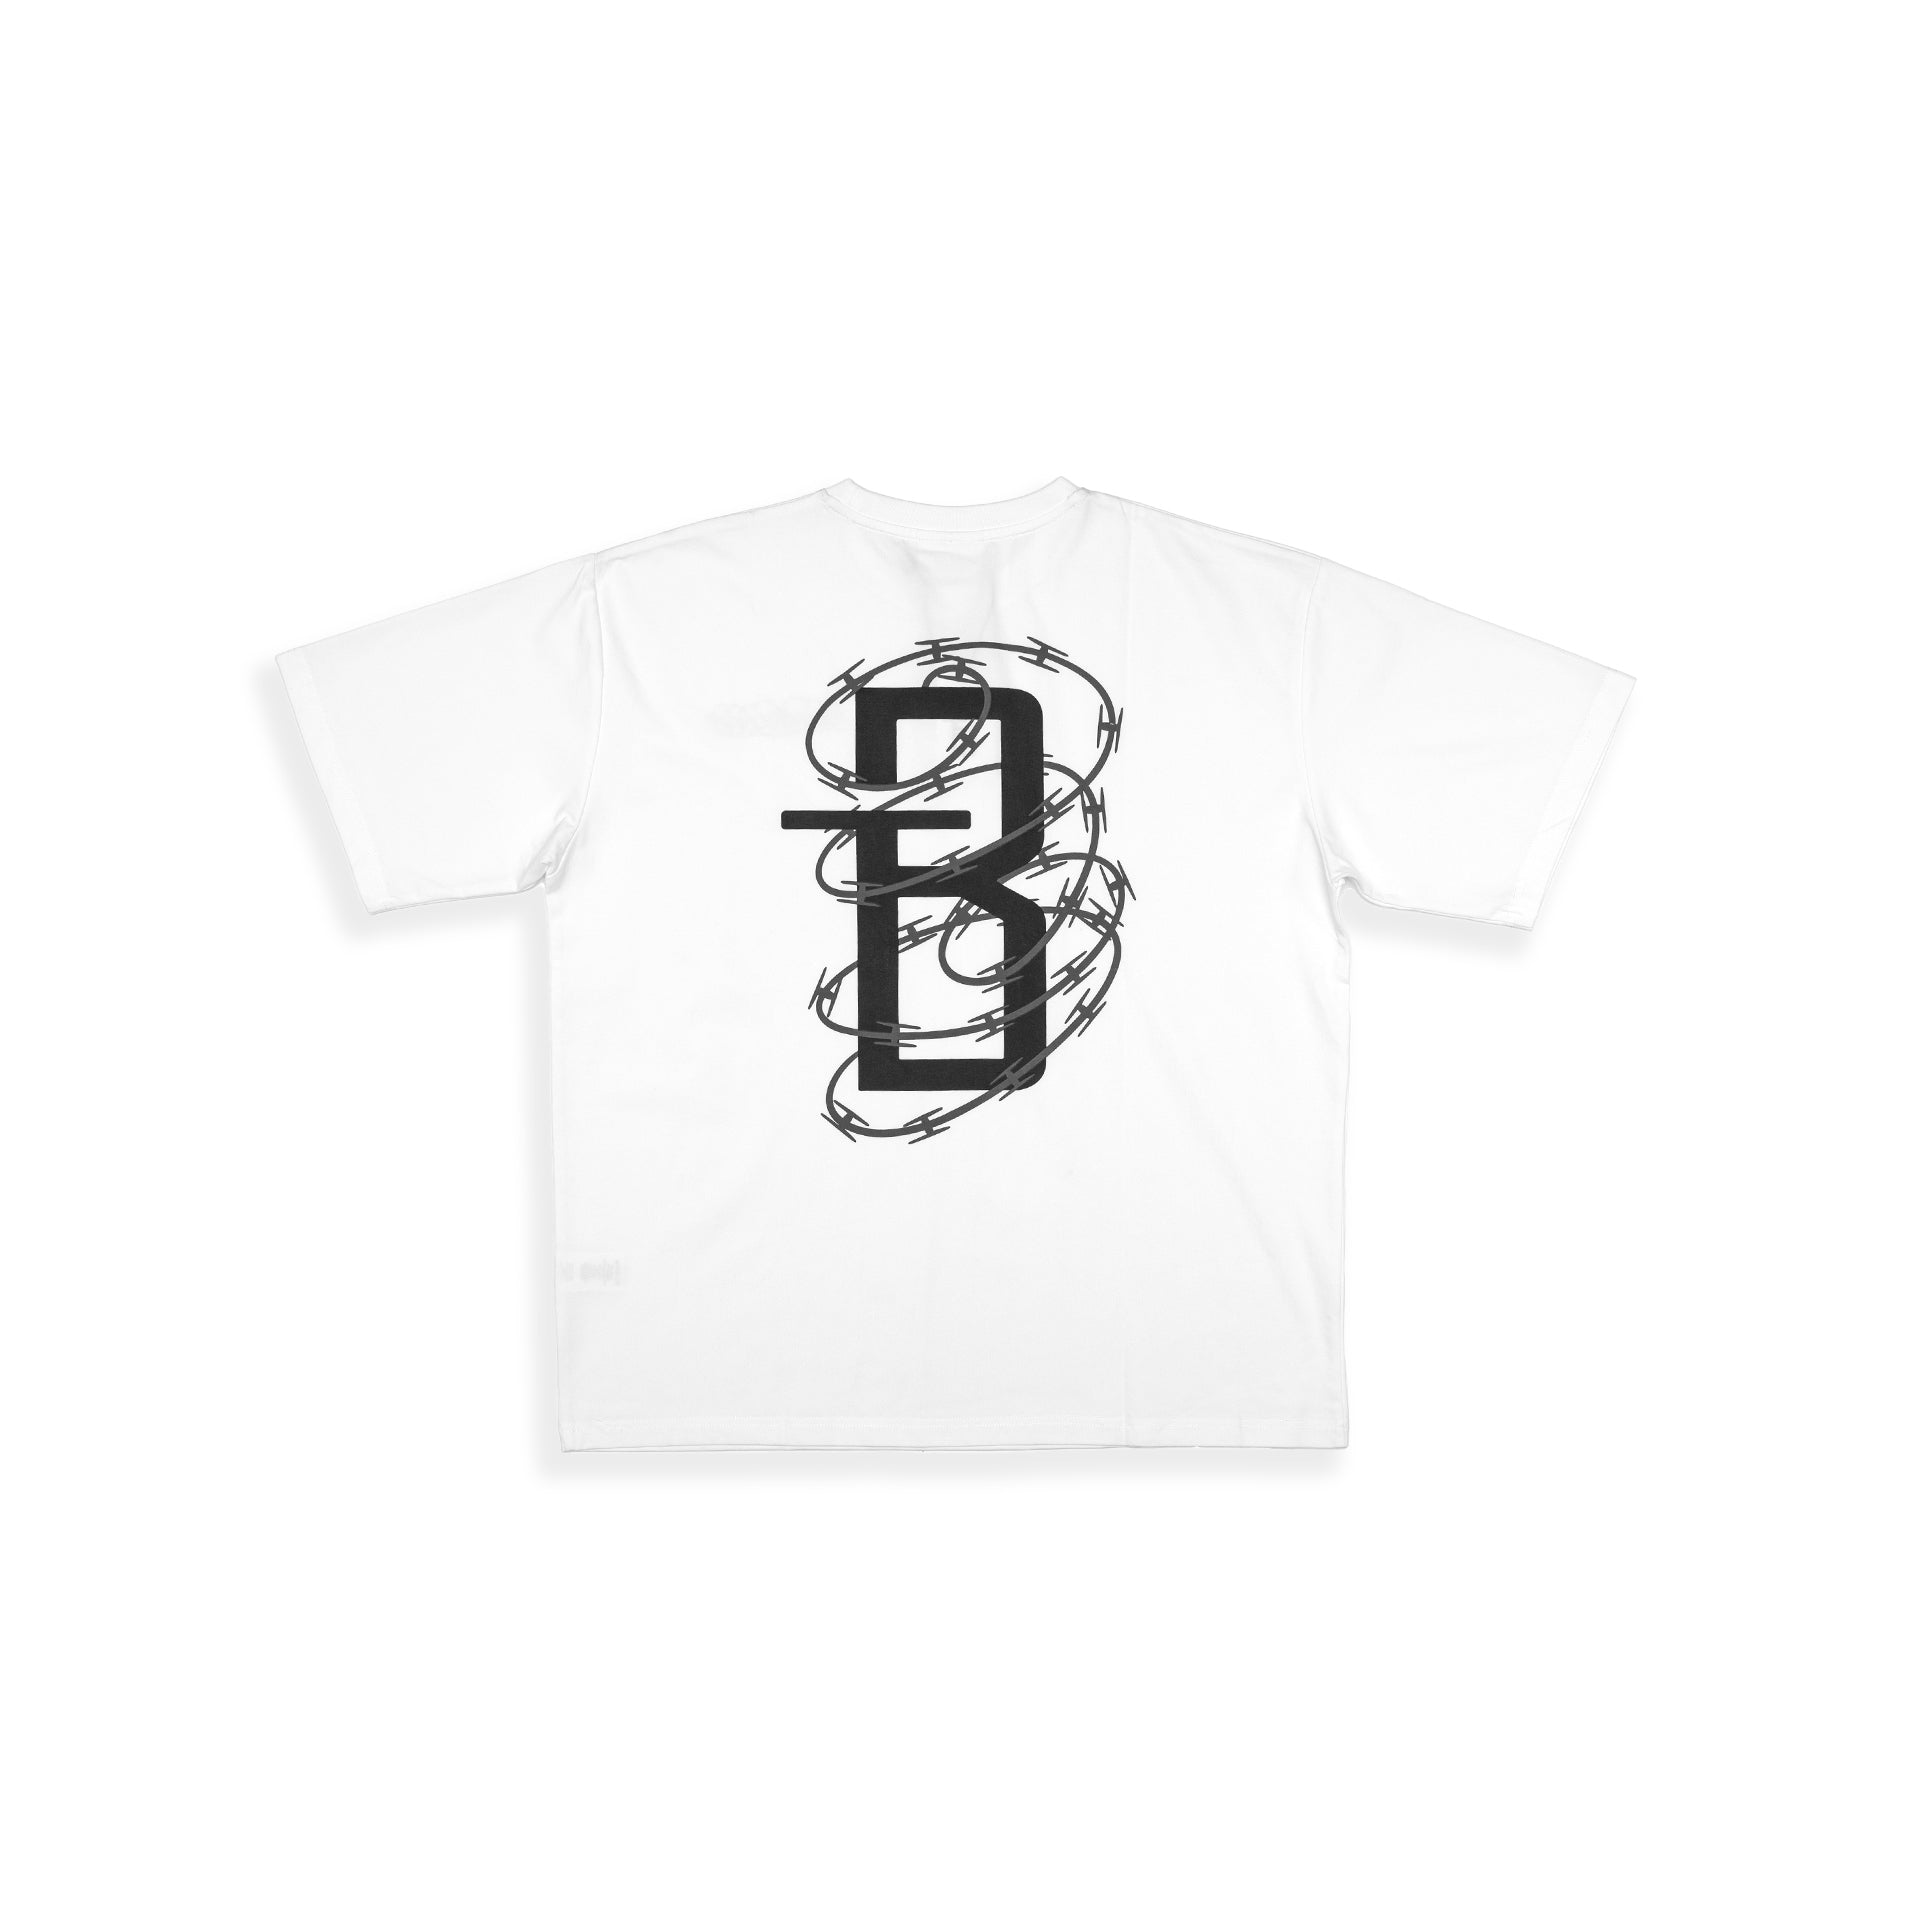 White T-shirt "Wire Fence" by Brandtionary